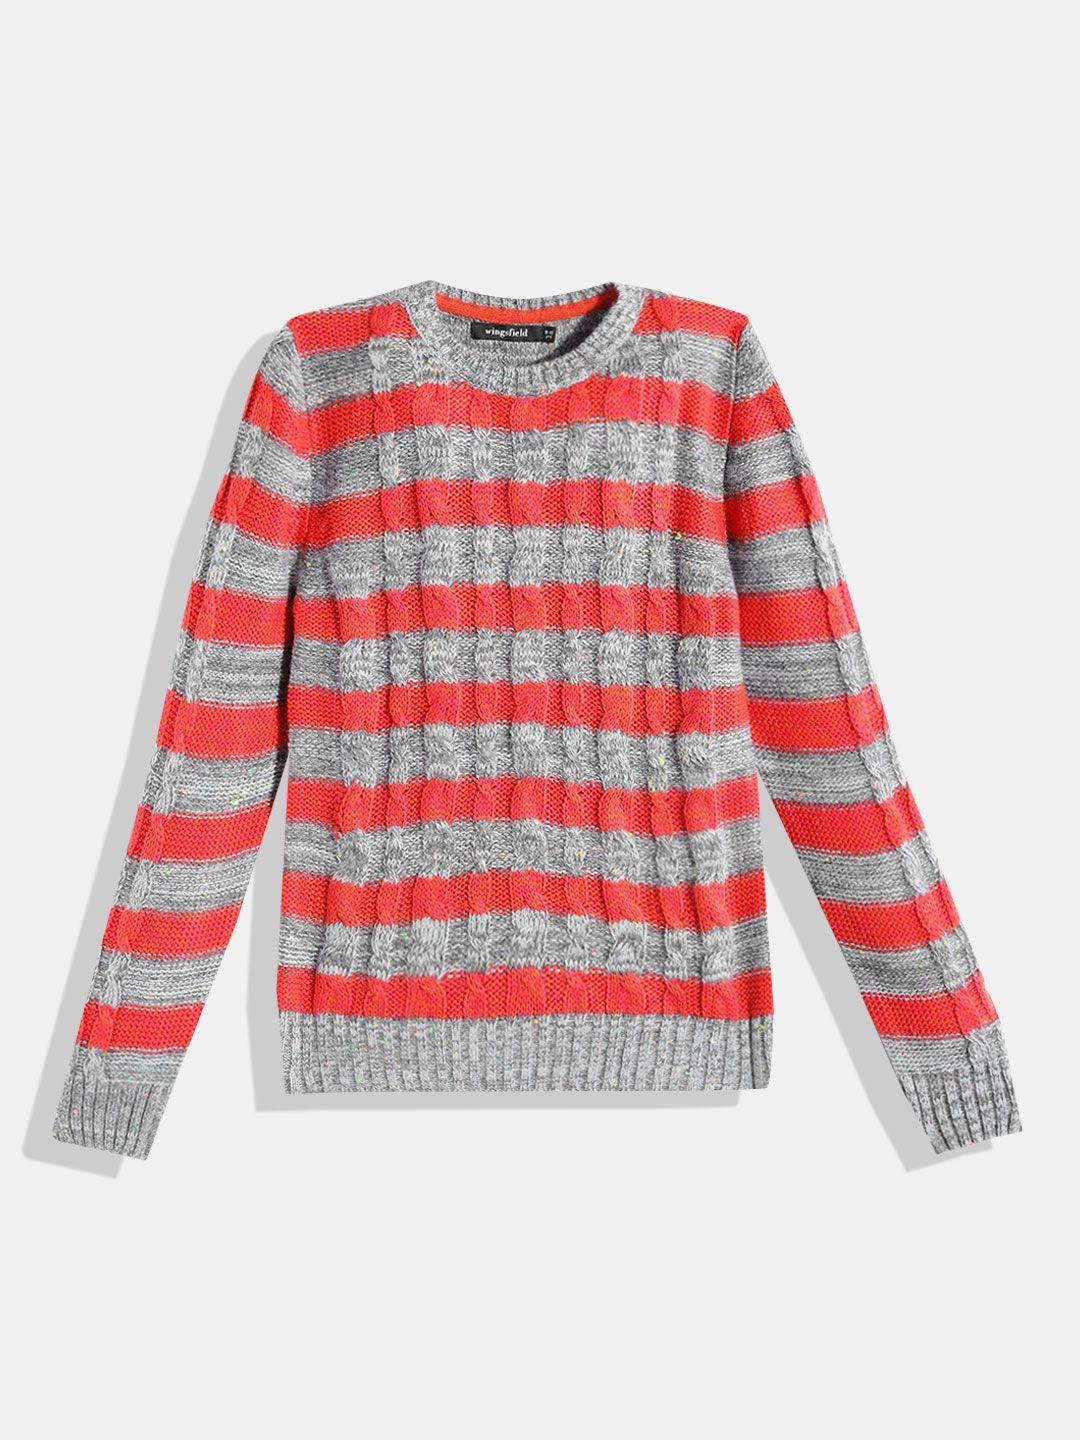 wingsfield boys red & grey cable knit acrylic pullover